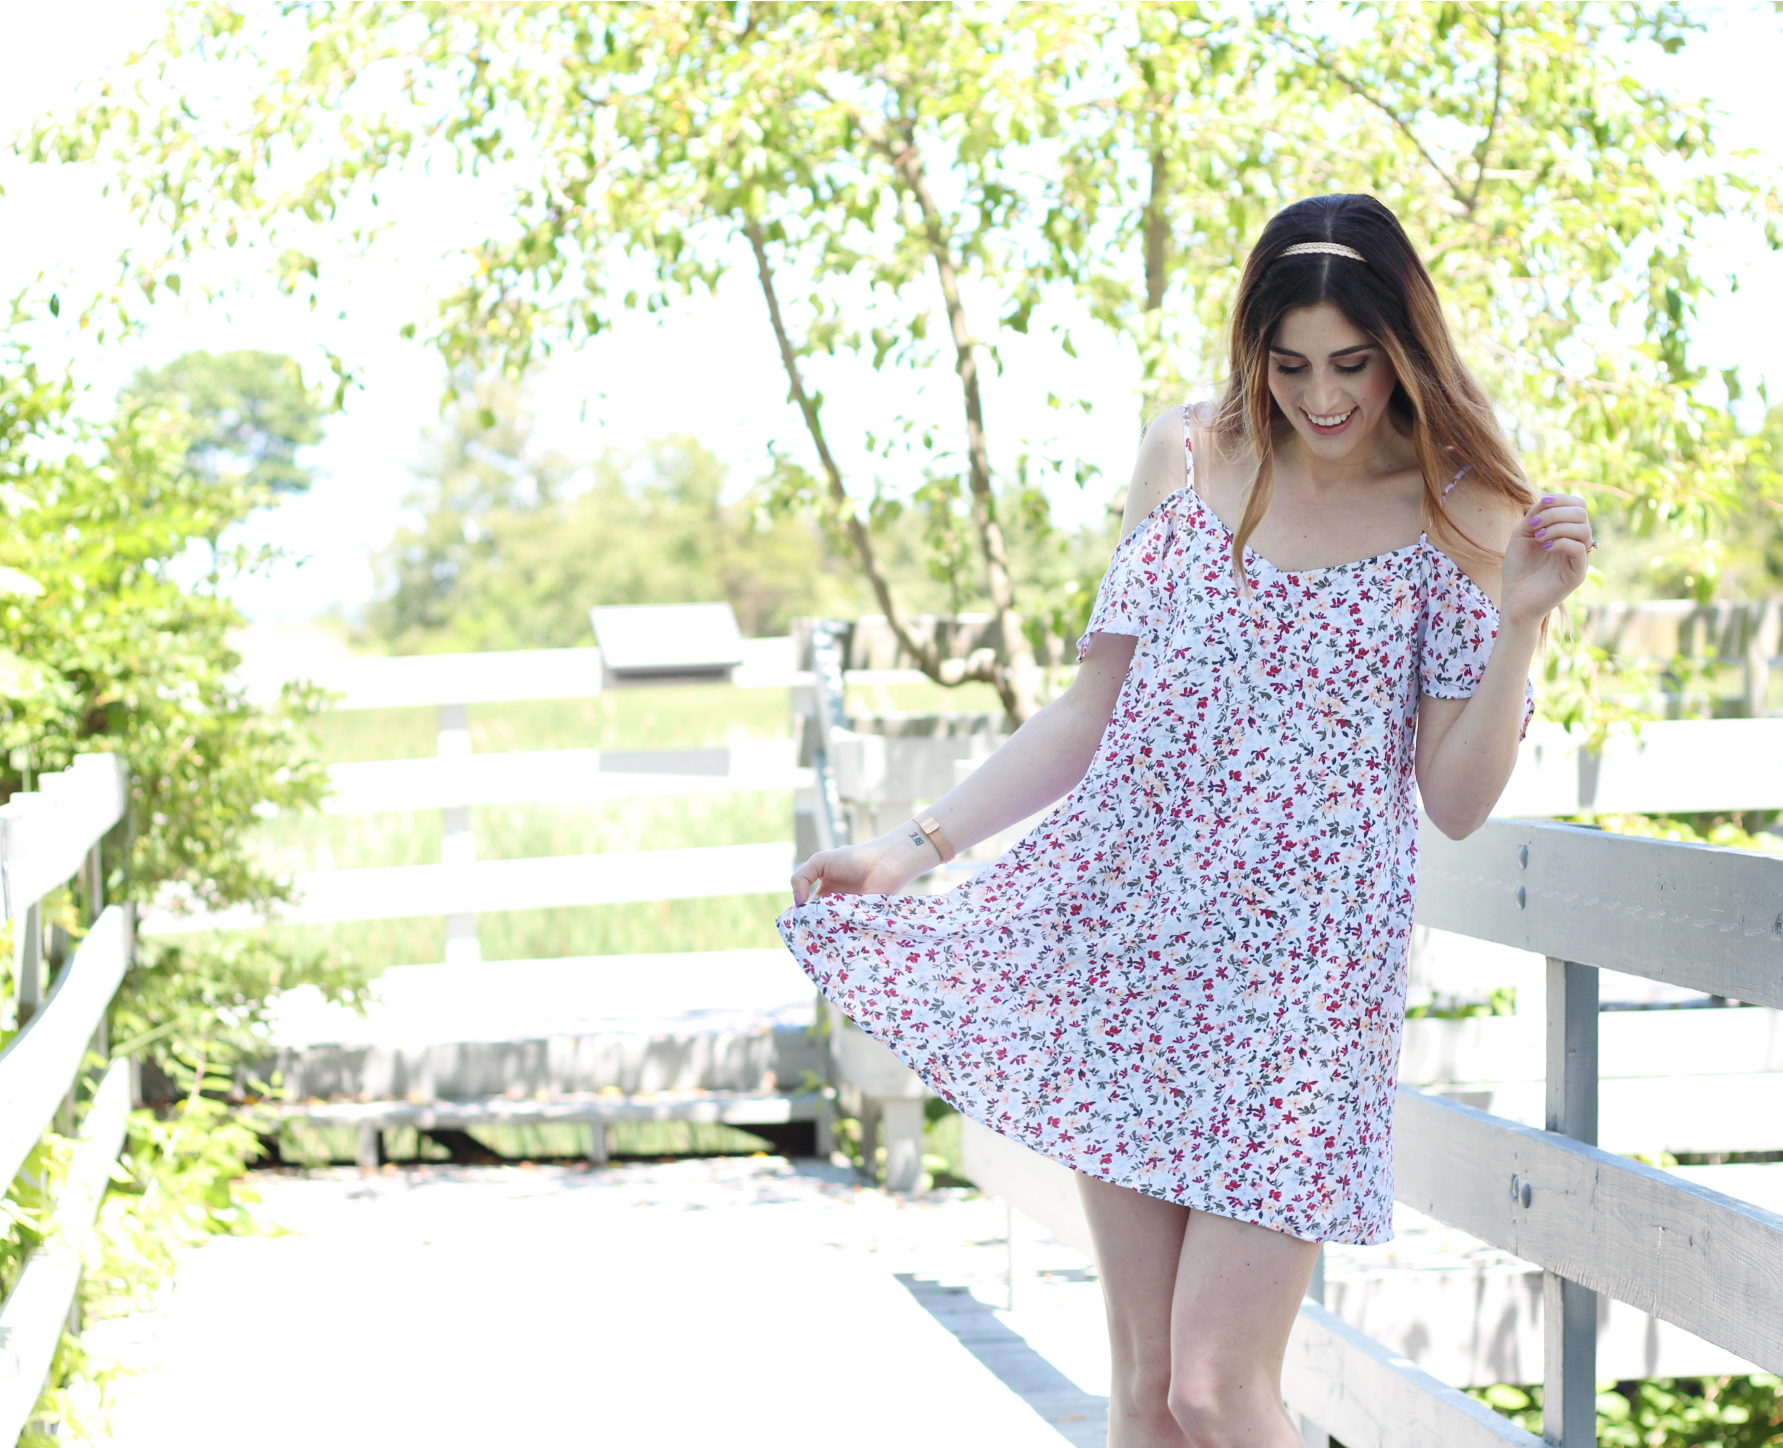 Different ways to Style Floral Clothing | How to Wear Floral | But First, Coffee - a Connecticut lifestyle and DIY blog